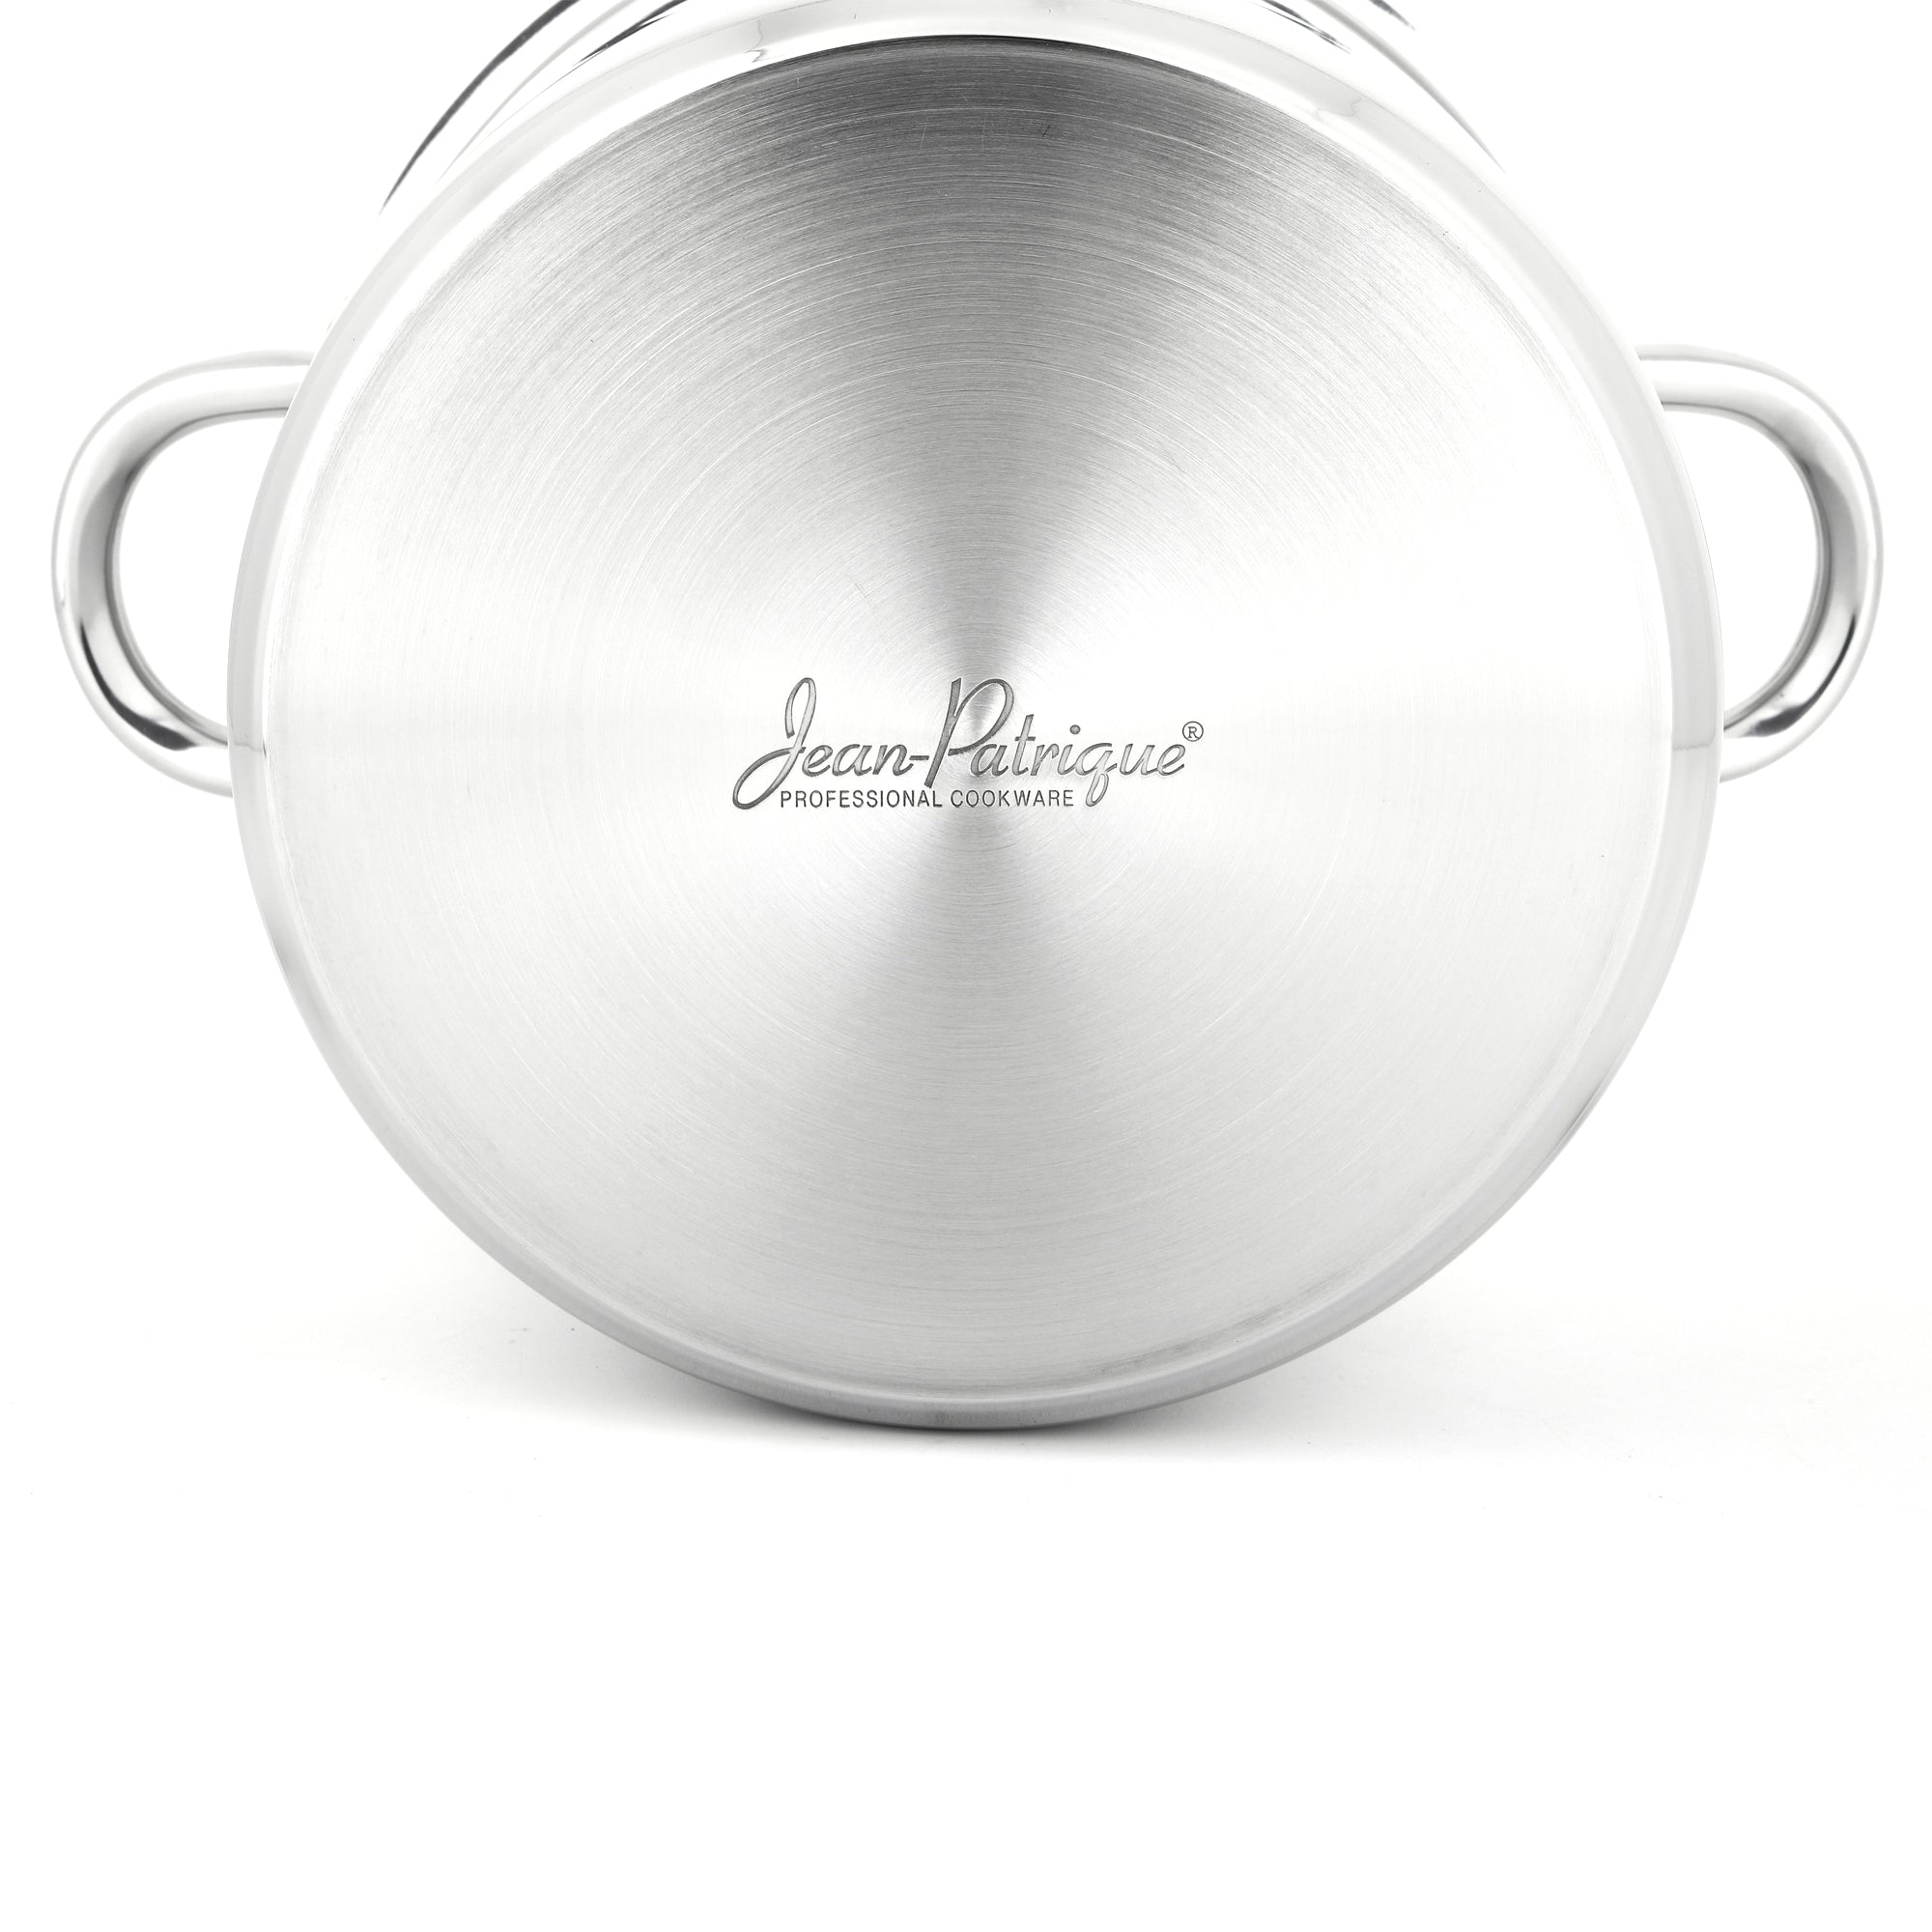 9 2/5 Inch Stainless Steel Stockpot & Lid